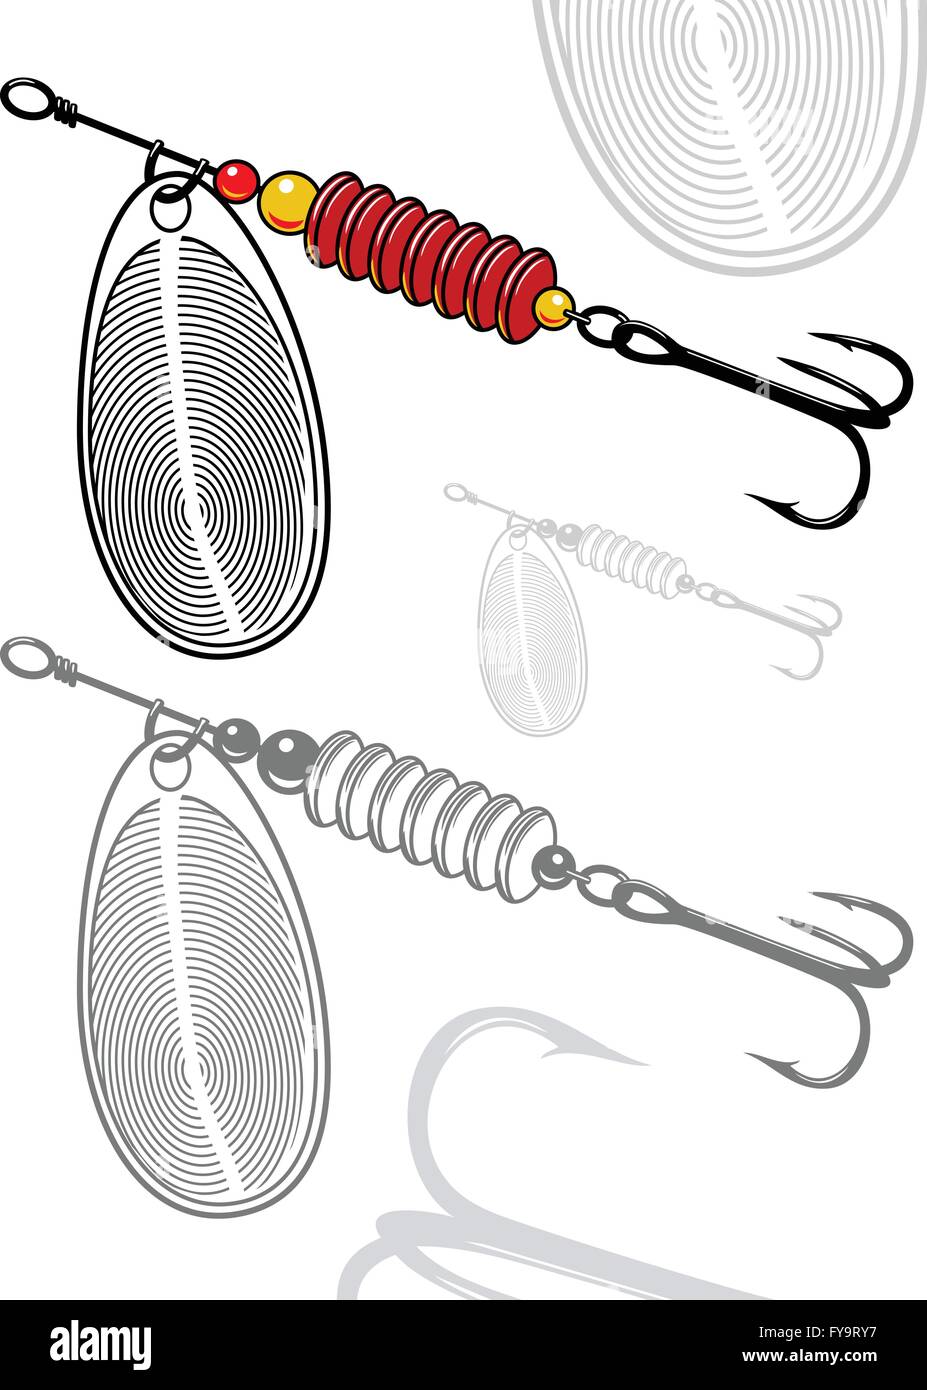 Artificial fishing lure Stock Vector